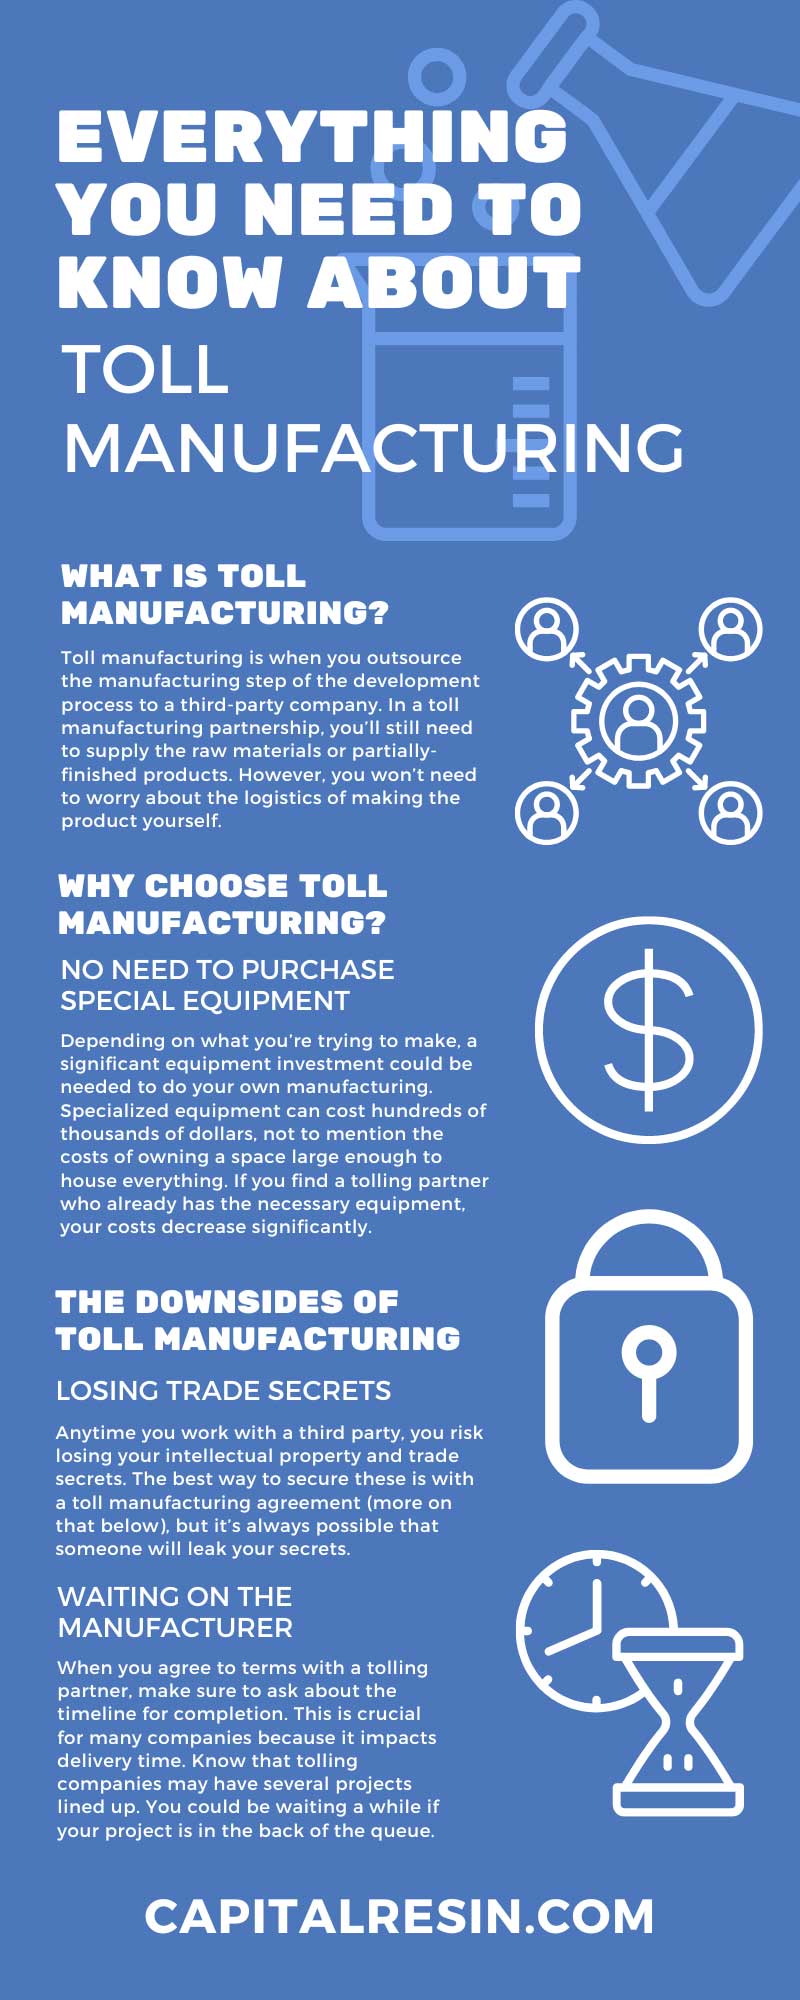 Everything You Need To Know About Toll Manufacturing
